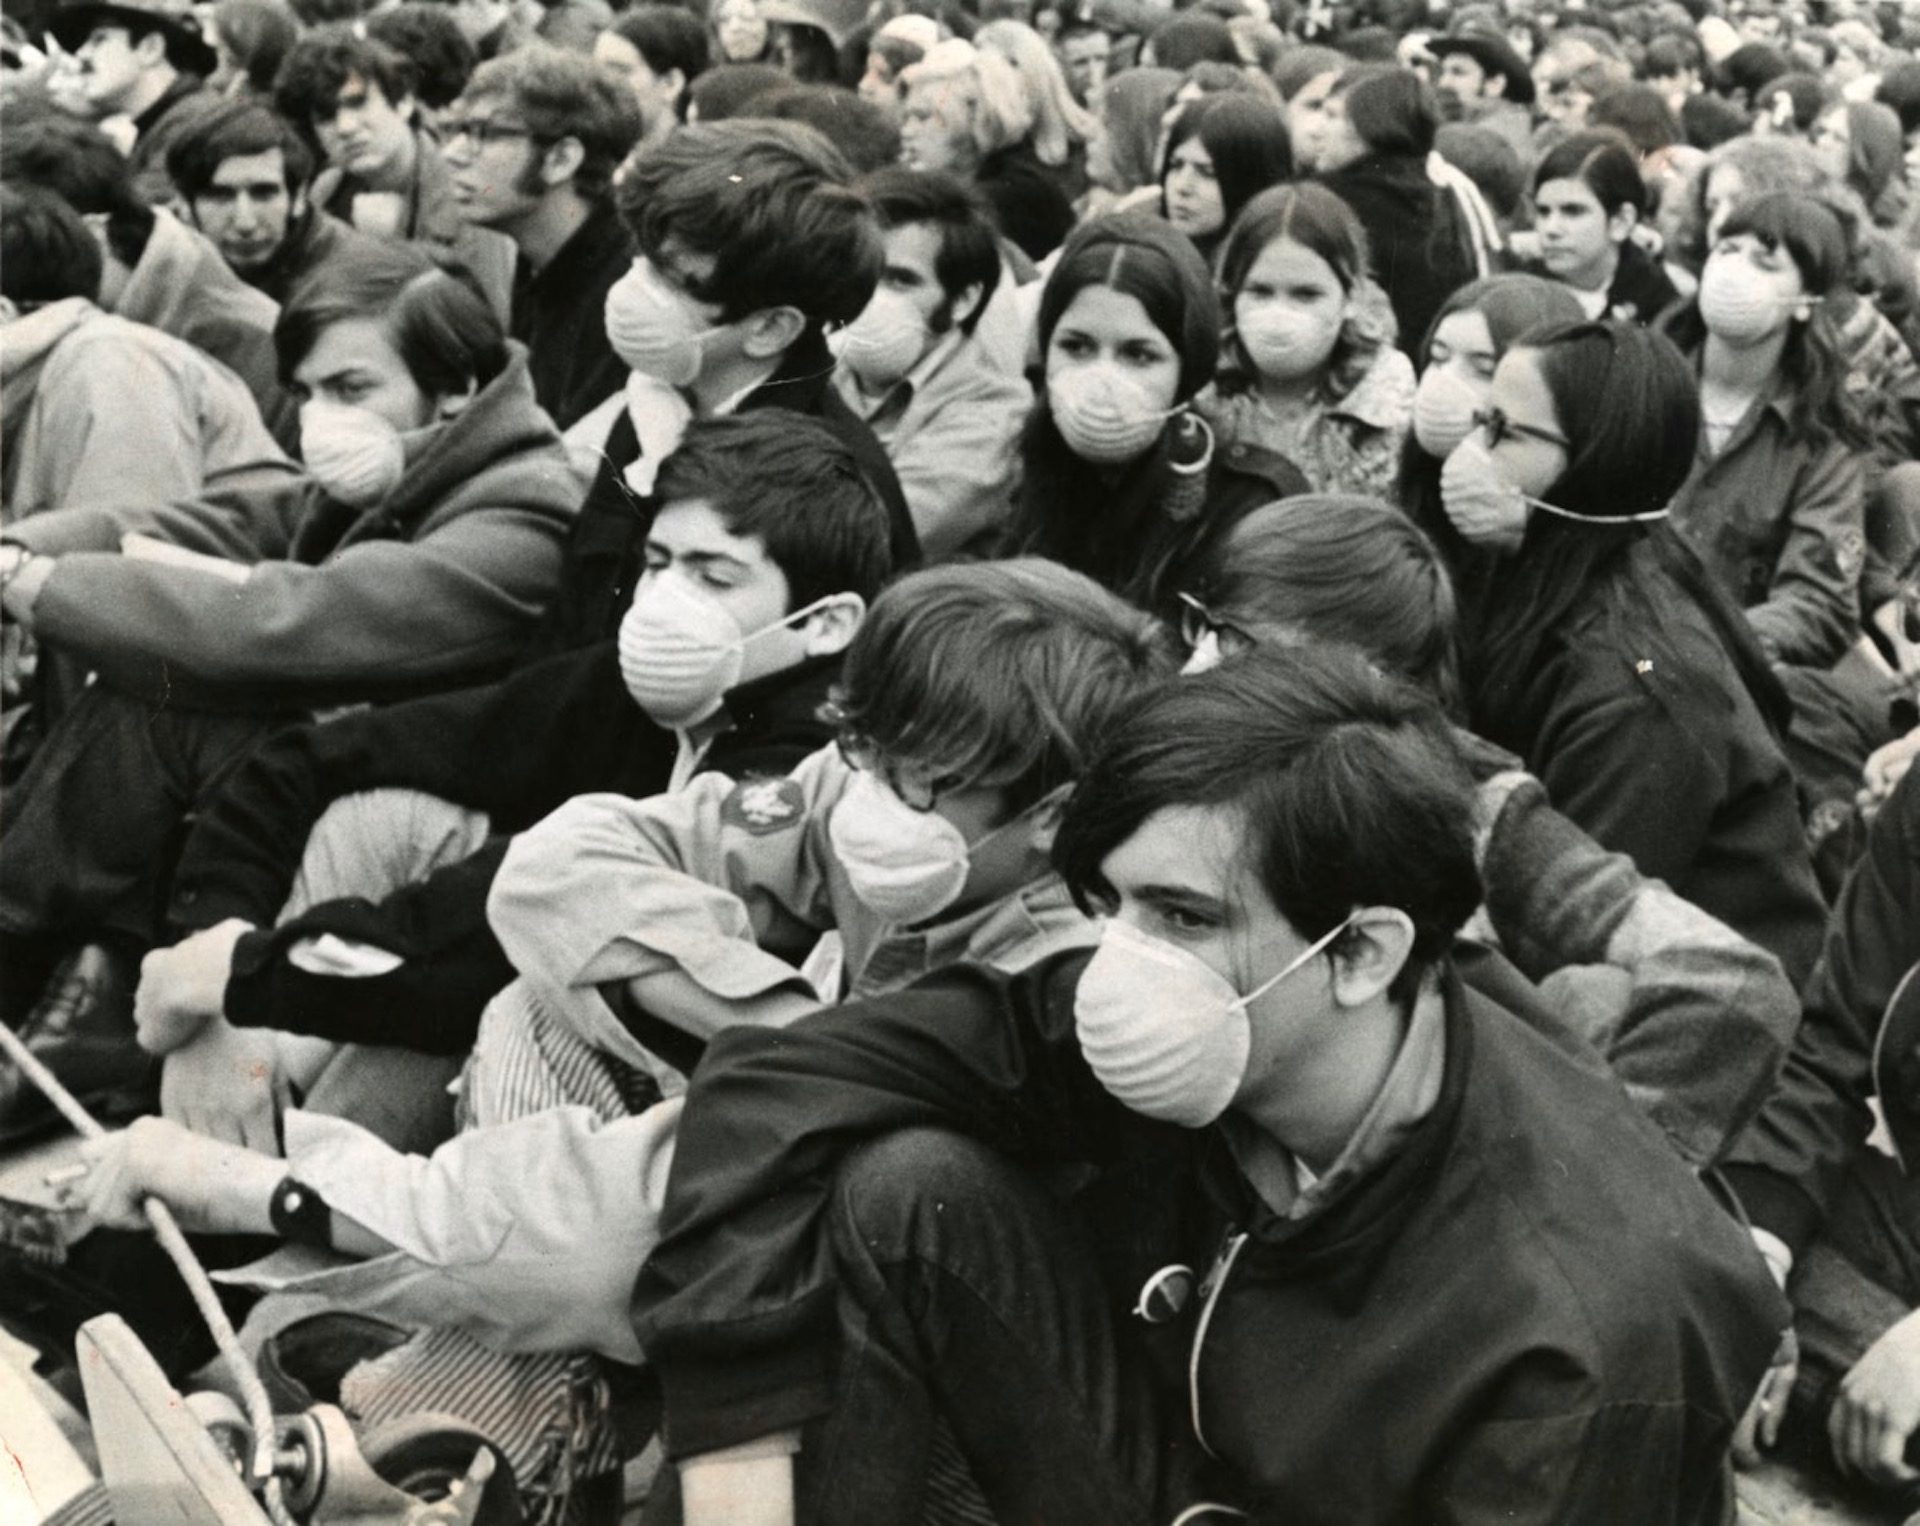 During an Earth Week rally at Independence Mall on April 21, 1970, many members of the audience opted to wear masks in an effort to show dissatisfaction with environmental policy.